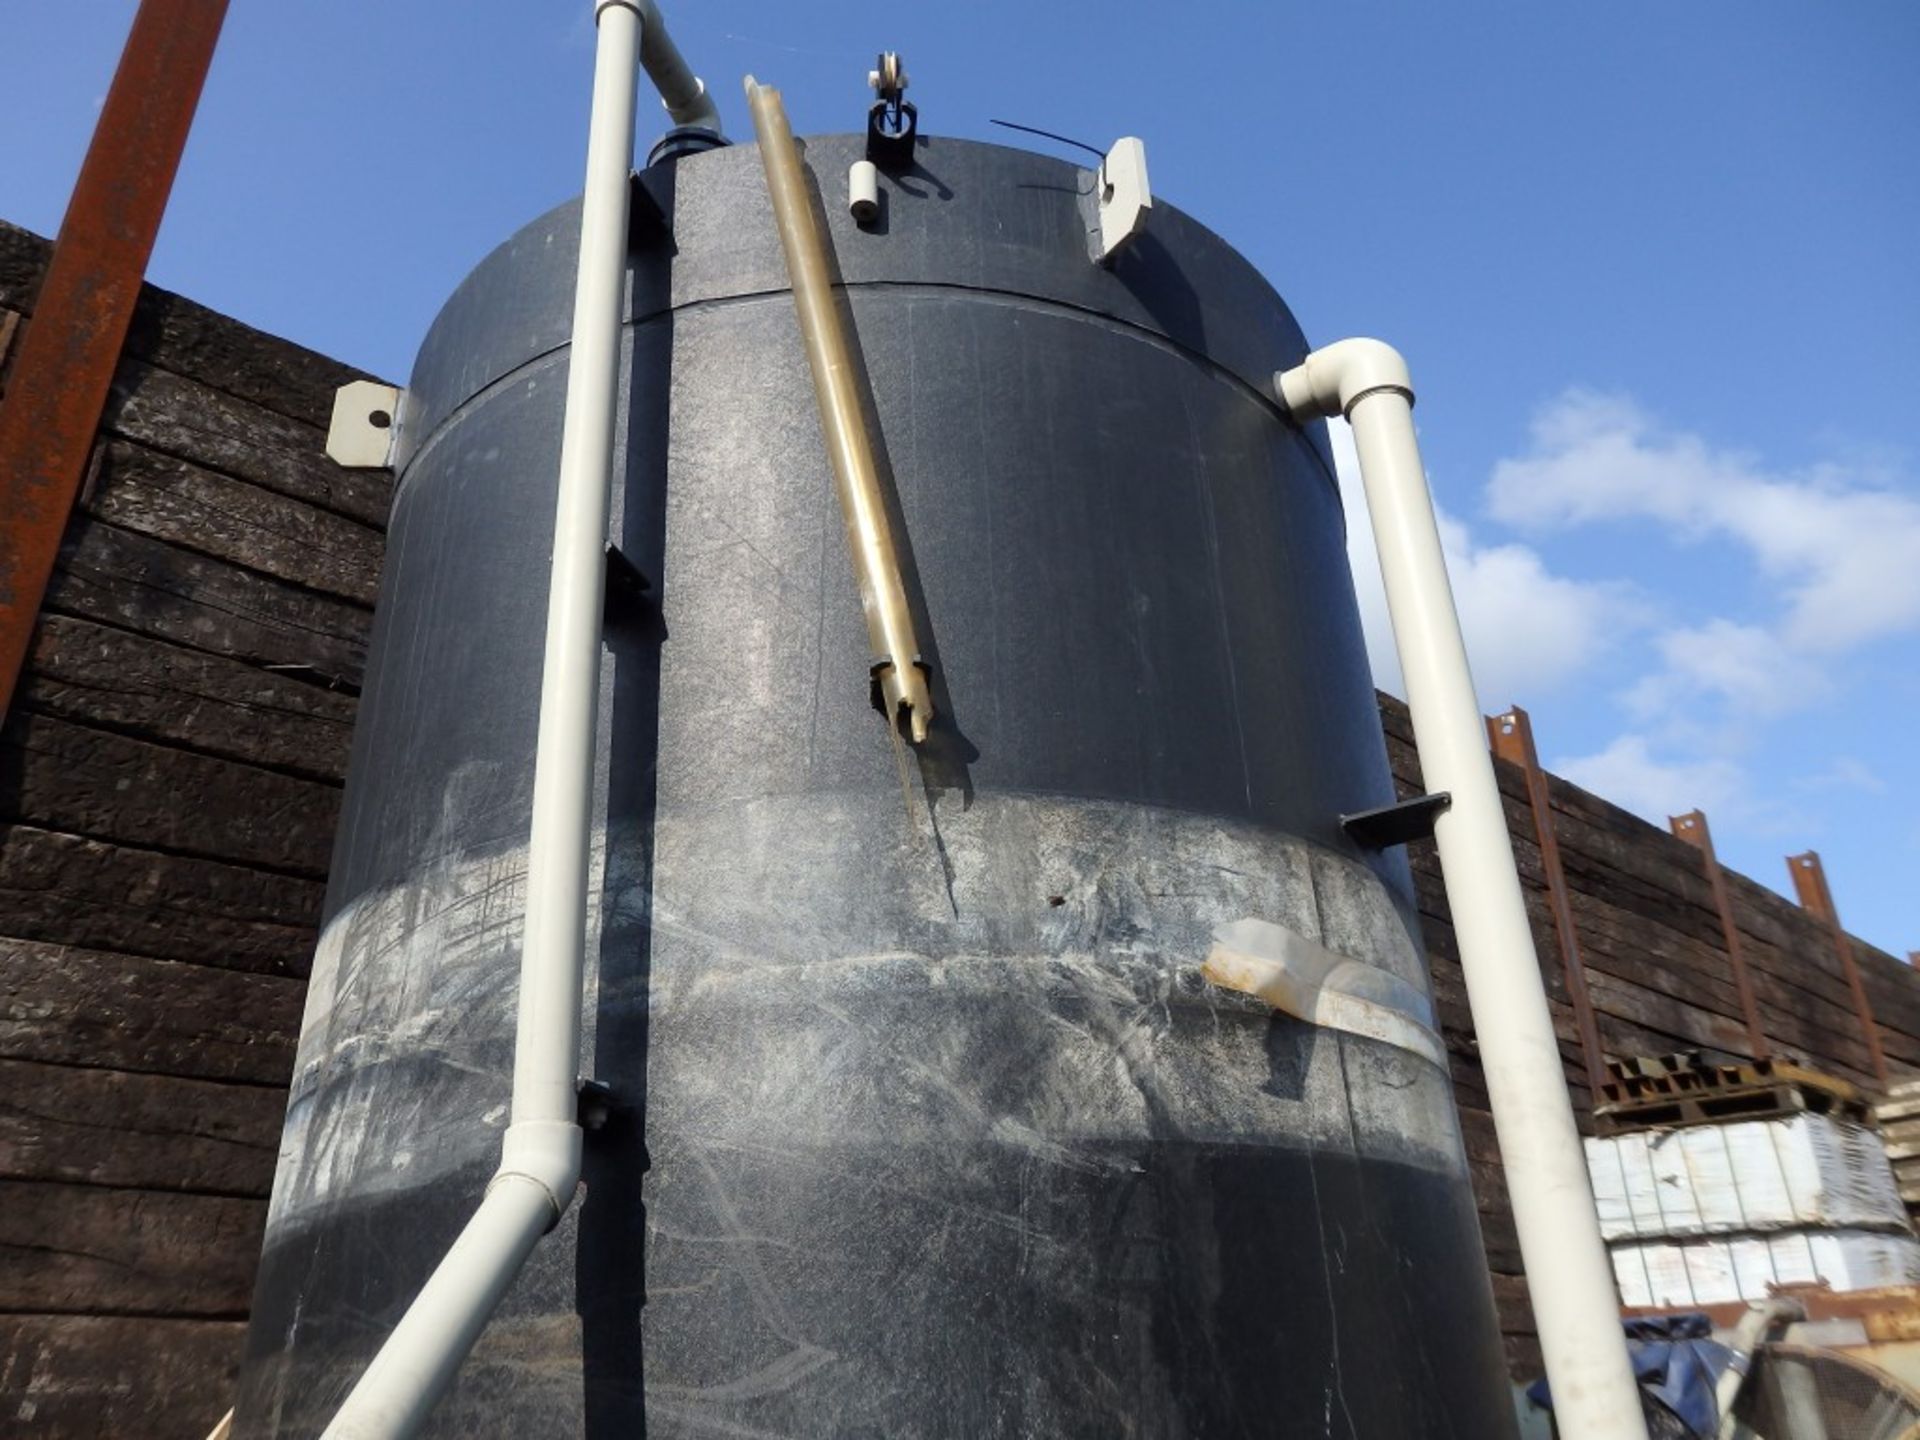 1 x Water Tower Bowser Tank - Used for Storing Rain, Water, Oils or Acids - Overall Height: 370cm - Image 4 of 11